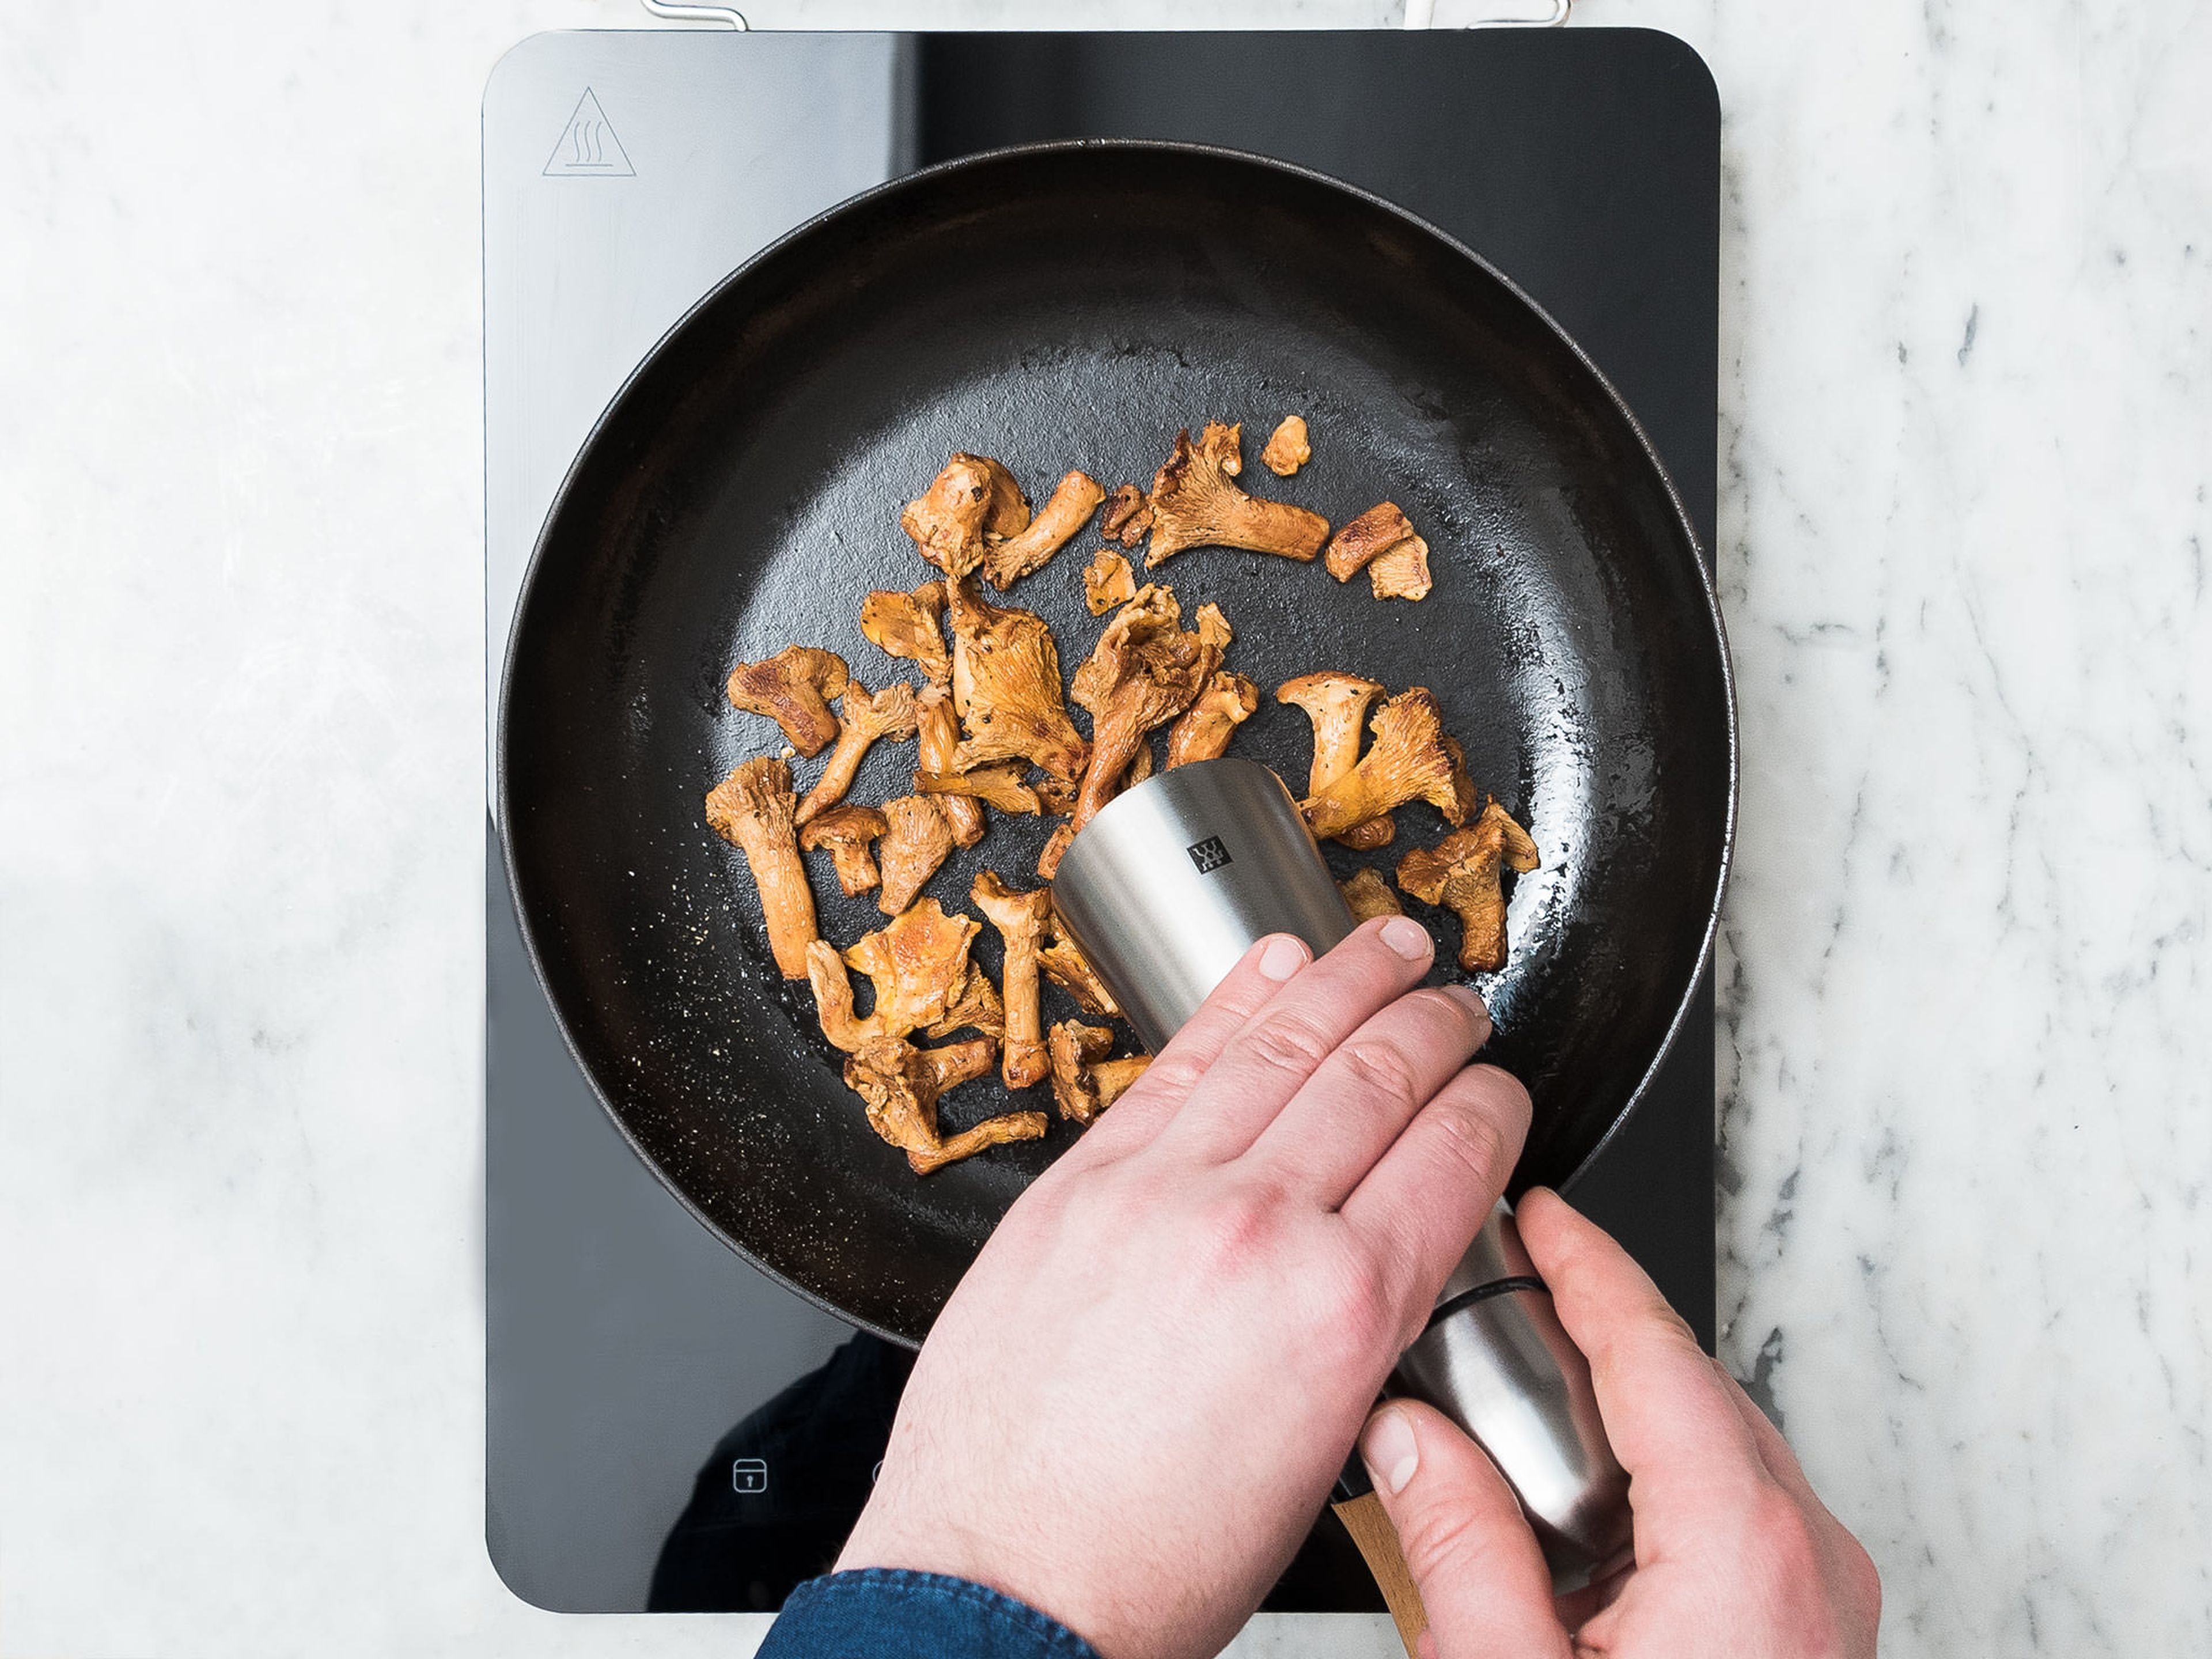 In the same frying pan, heat half the olive oil over medium heat and cook the chanterelle mushrooms, stirring gently, for approx. 1 min. or until al dente. Season with salt and pepper. Set aside.